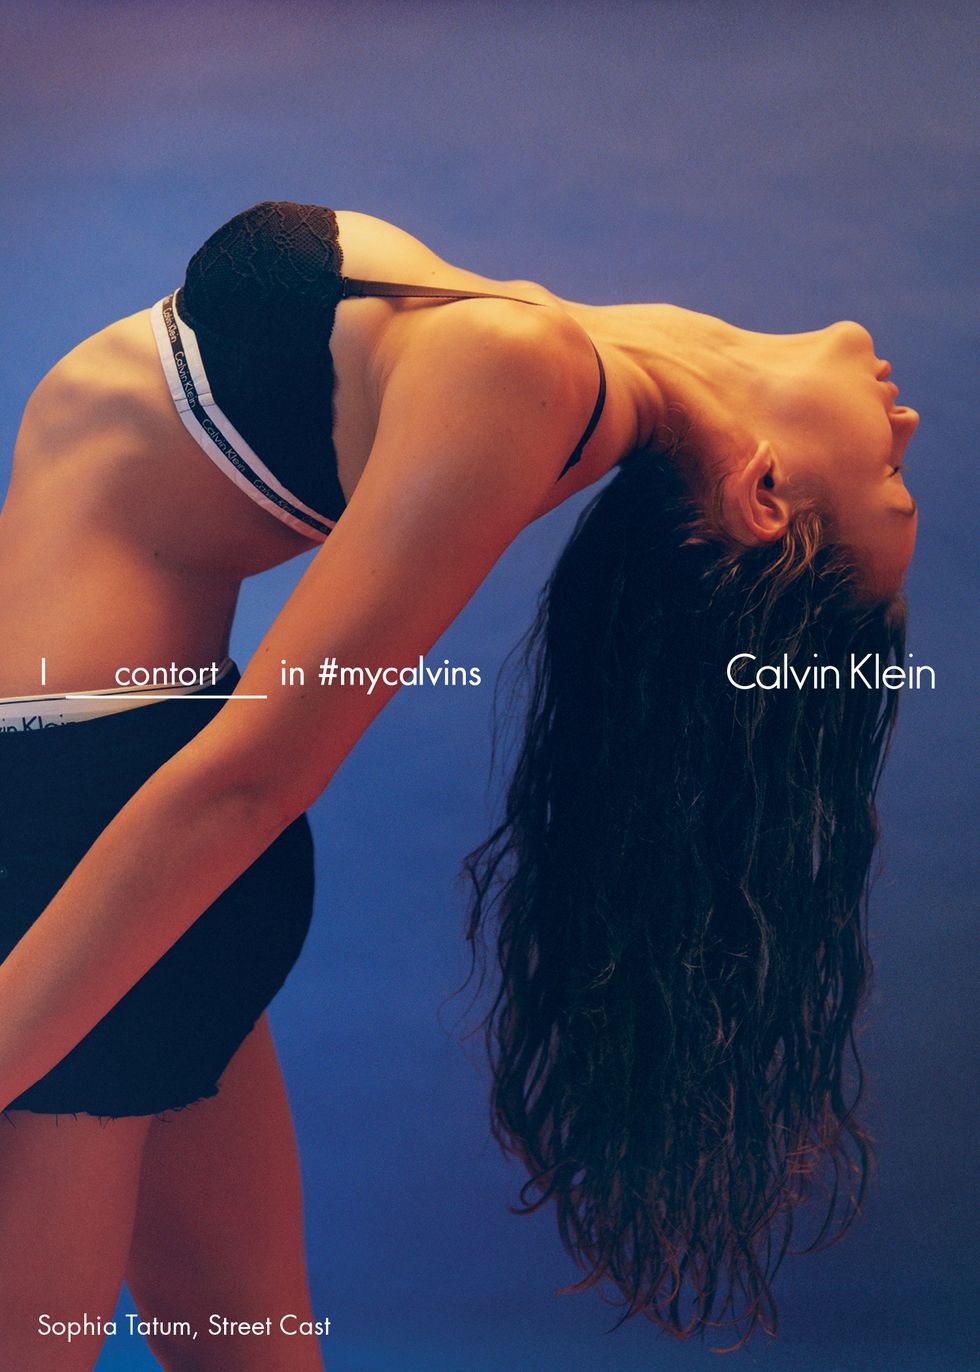 Calvin Klein's New Campaign is a Sexed-Up Millennial Fever Dream